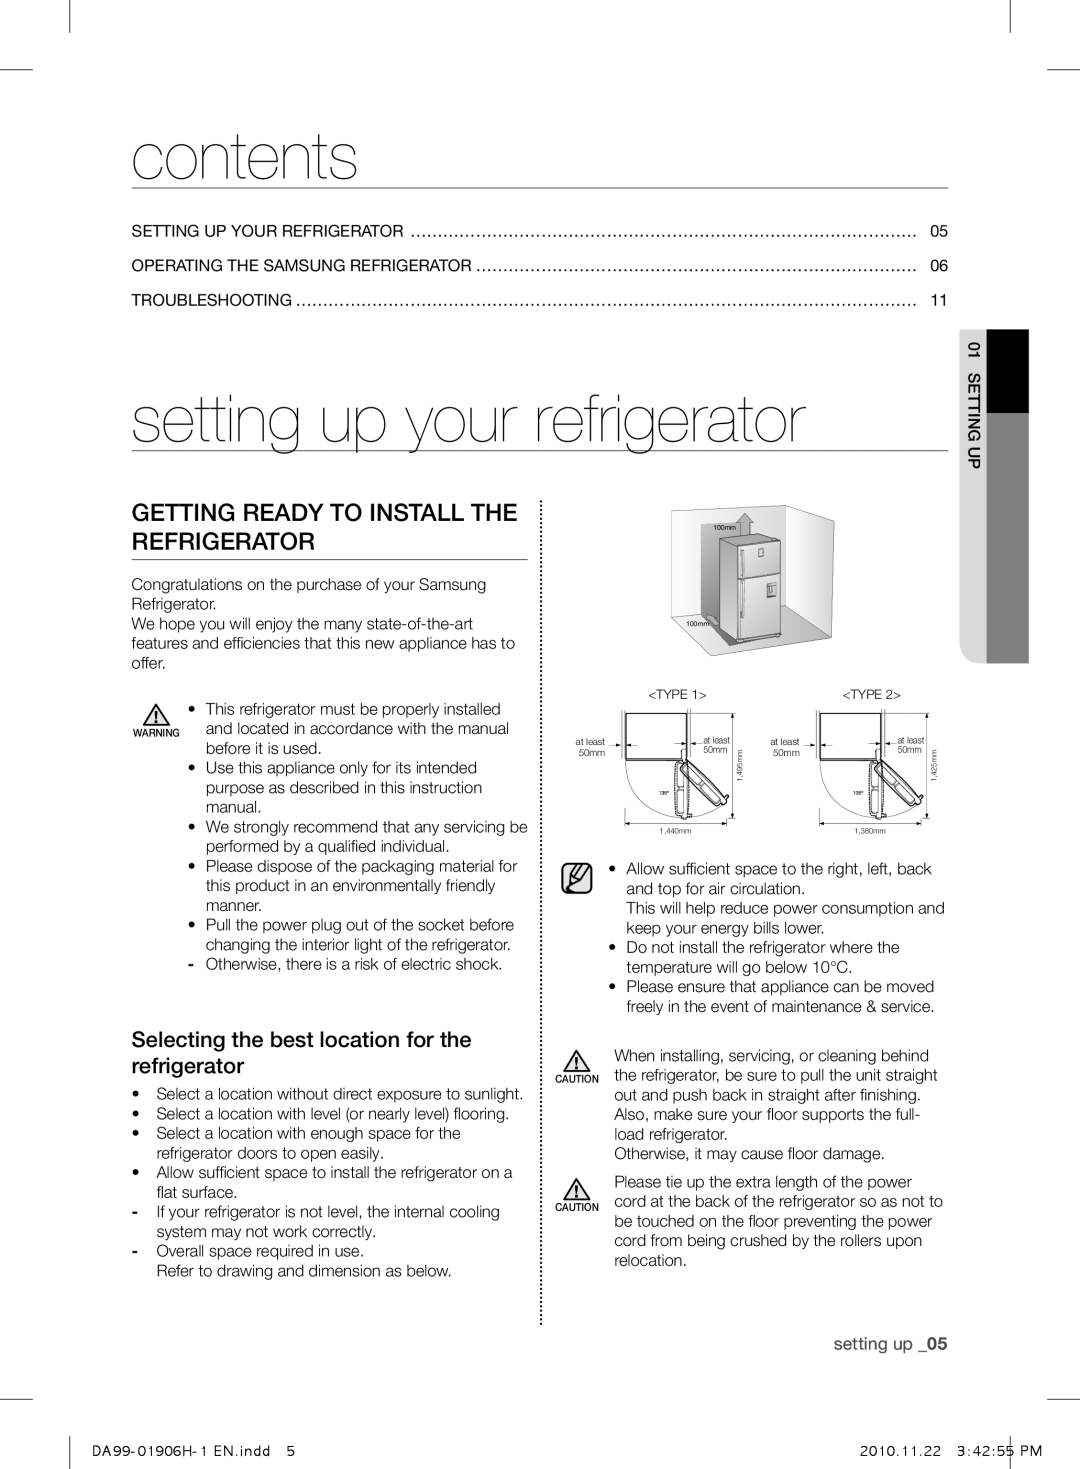 Samsung RT50QBPN1/XEF, RT50FMSW1/XEF contents, setting up your refrigerator, gEtting rEaDy to instaLL tHE rEfrigErator 